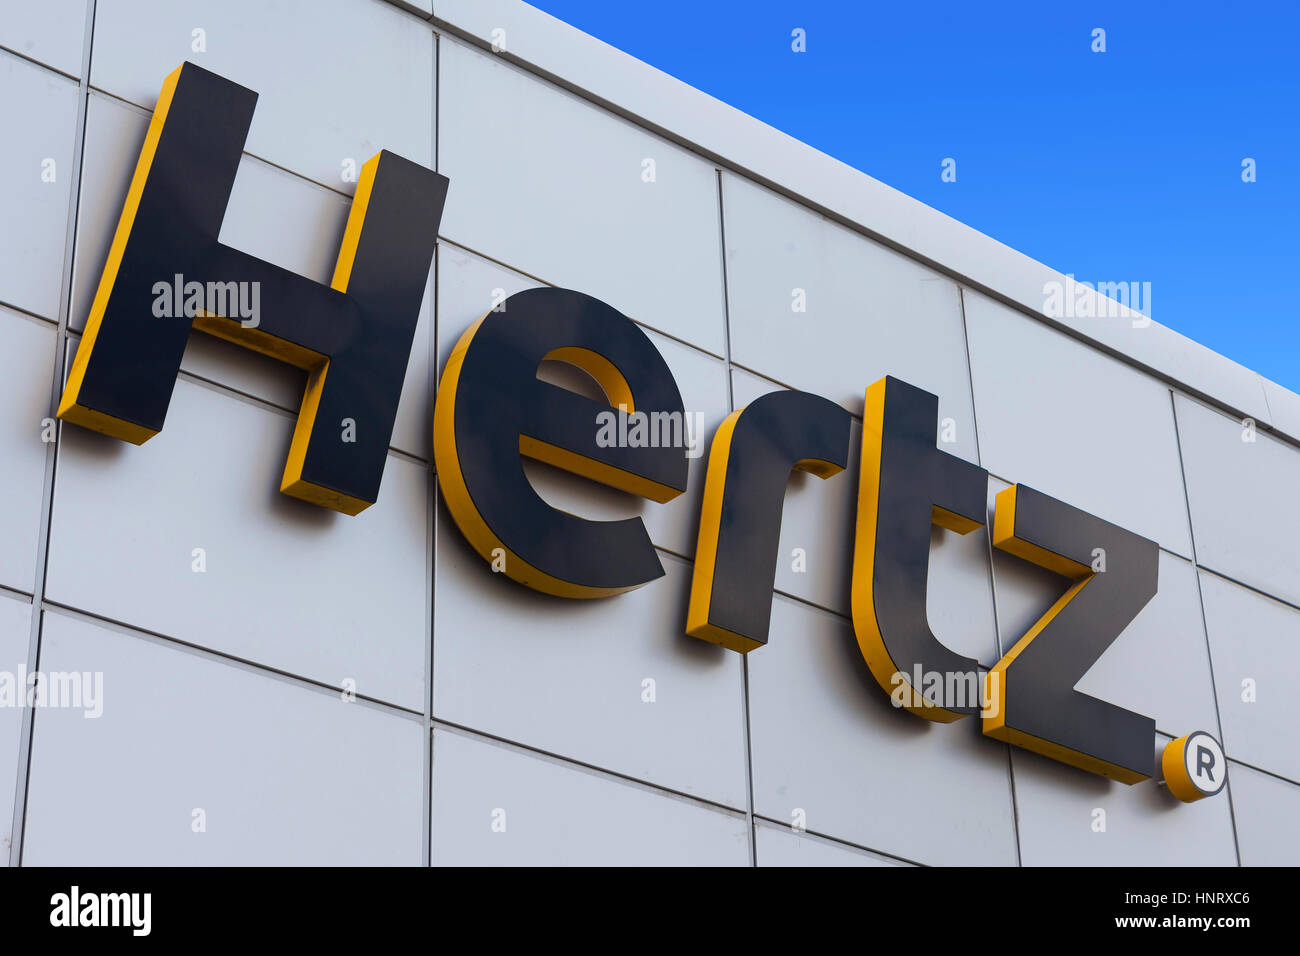 Hertz sign on a building. Hertz is an American car rental company with international locations in 150 countries worldwide. Stock Photo